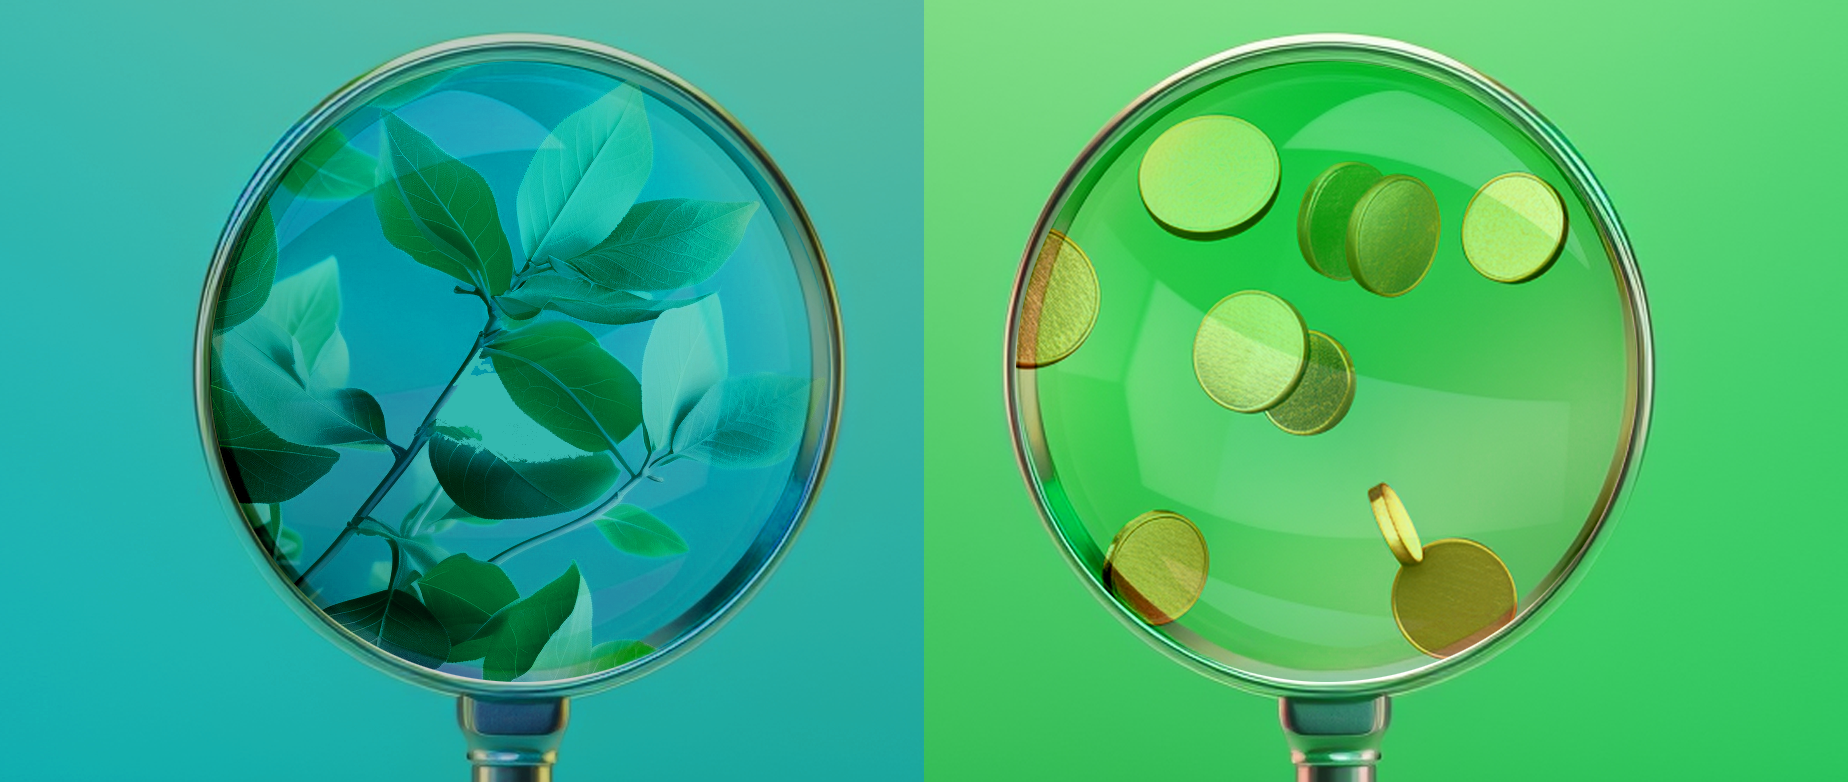 A magnifying glass with green leaves on an aqua background next to a magnifying glass with gold coins on a green background.